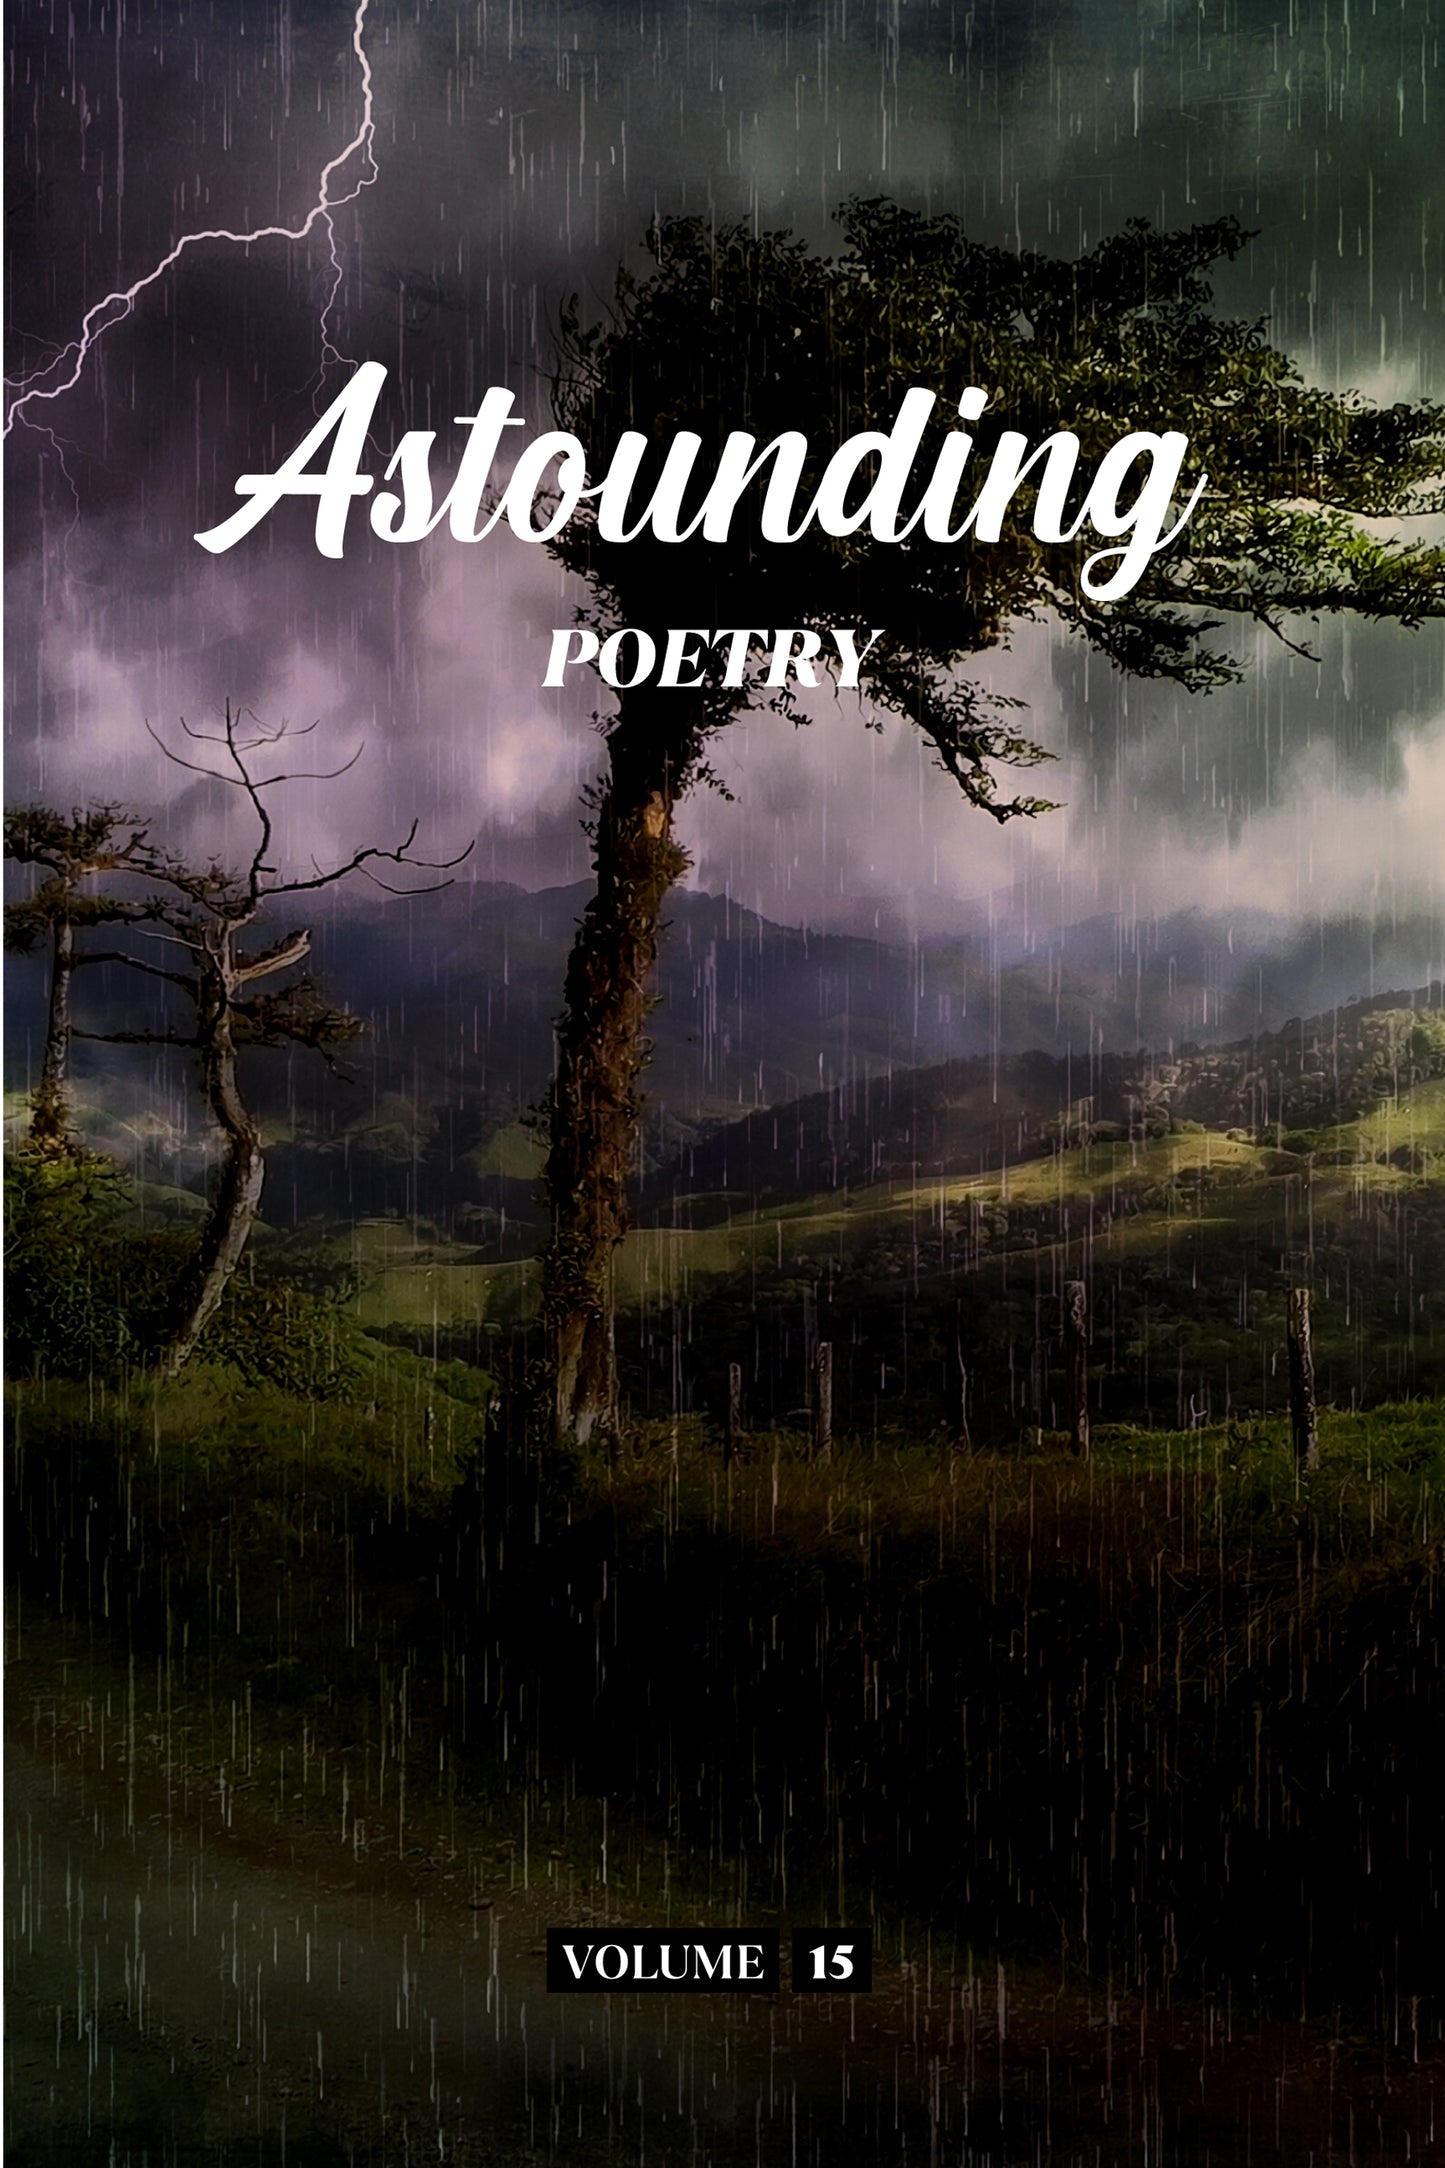 Astounding Poetry (Volume 15) - Physical Book